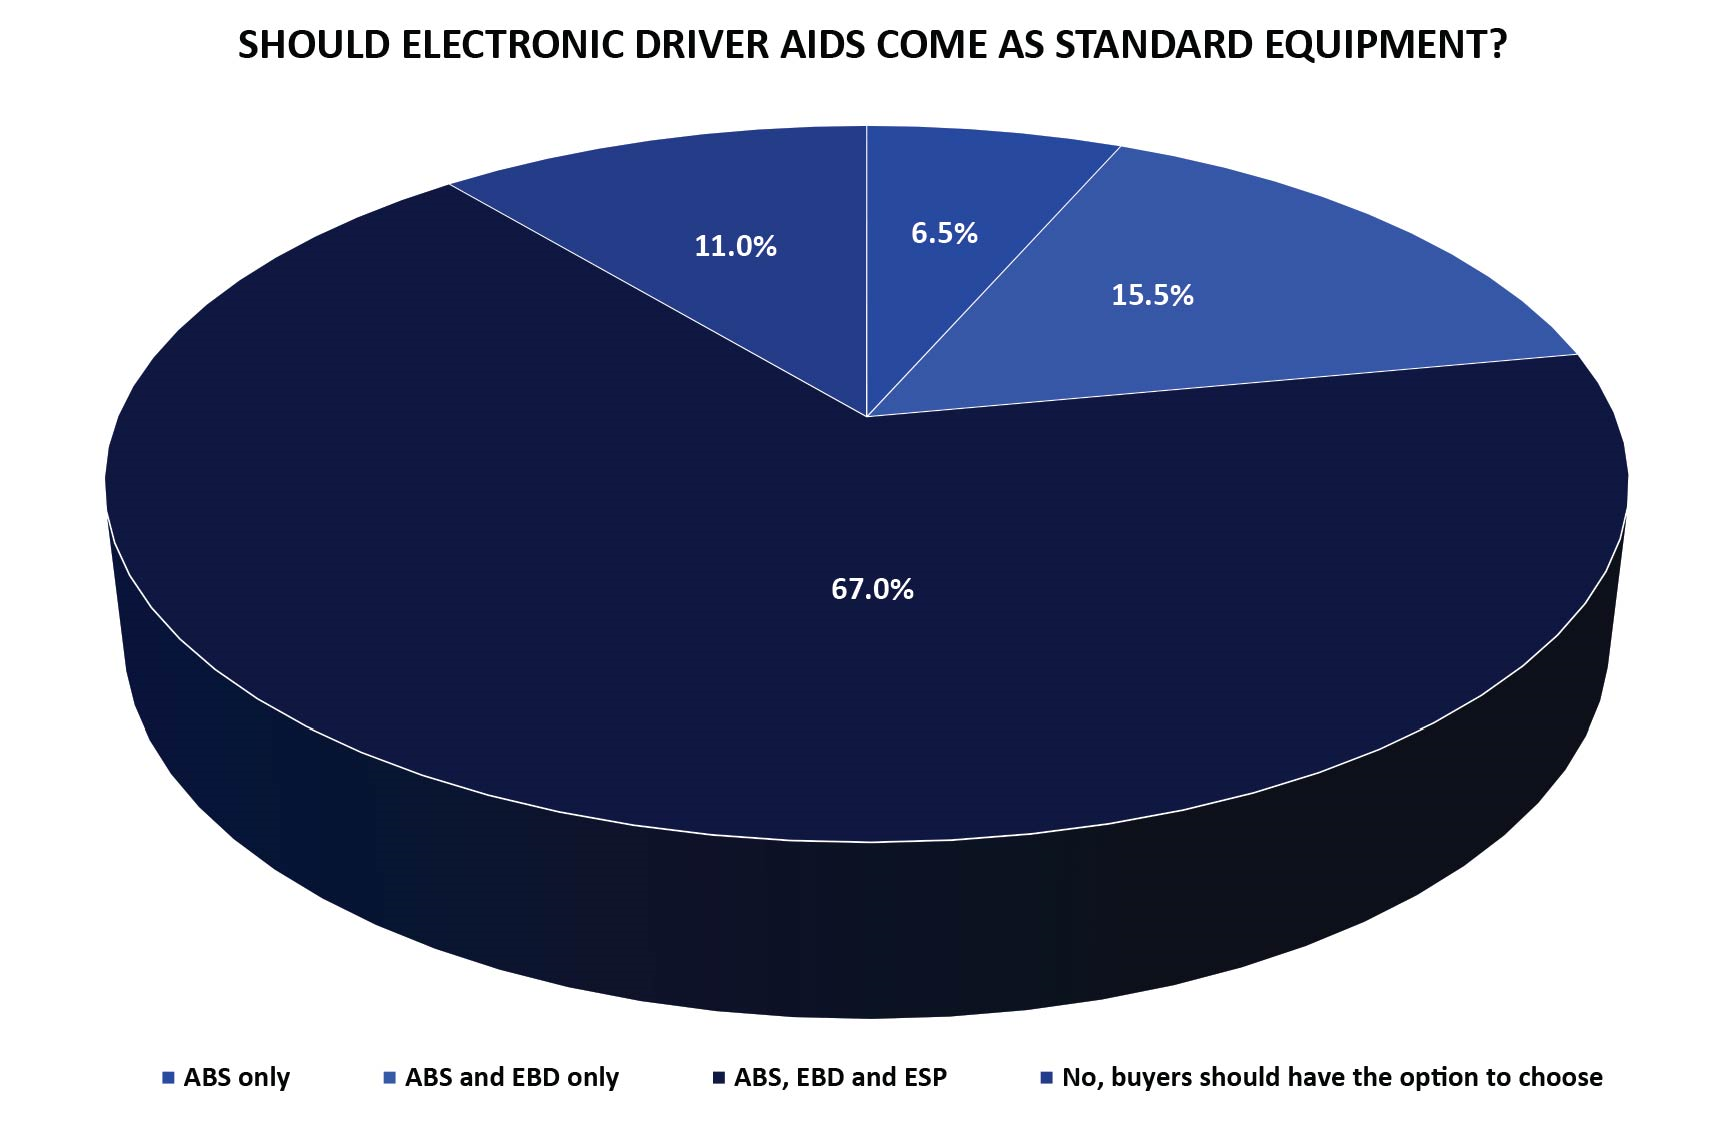 Electronic Driver AIDS Comes as Standard Equipment